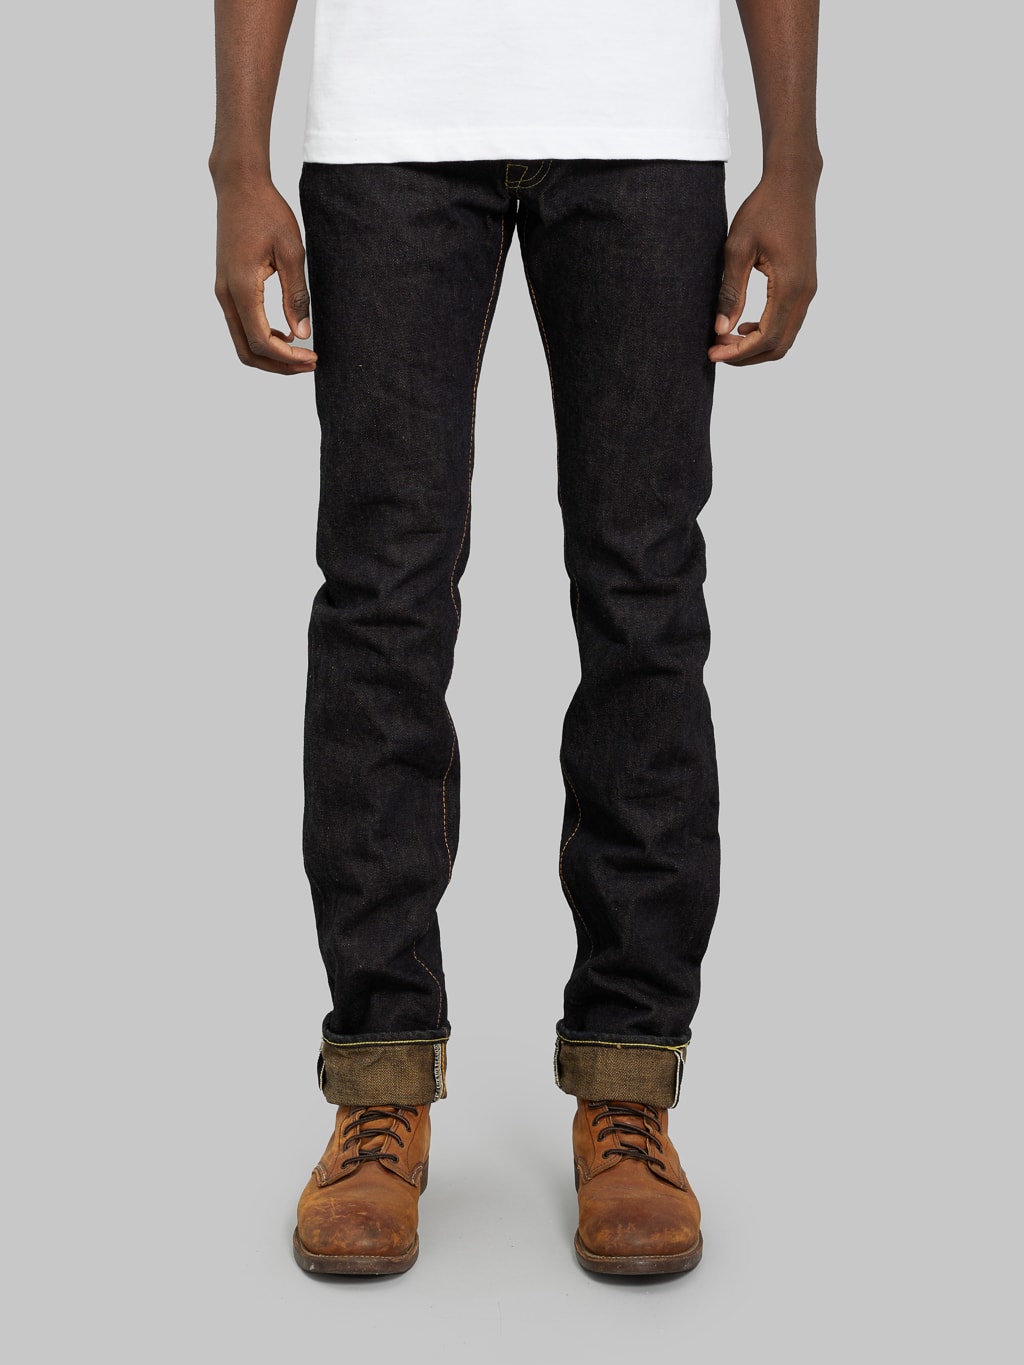 The Strike Gold Brown Weft Slim Jeans front fit